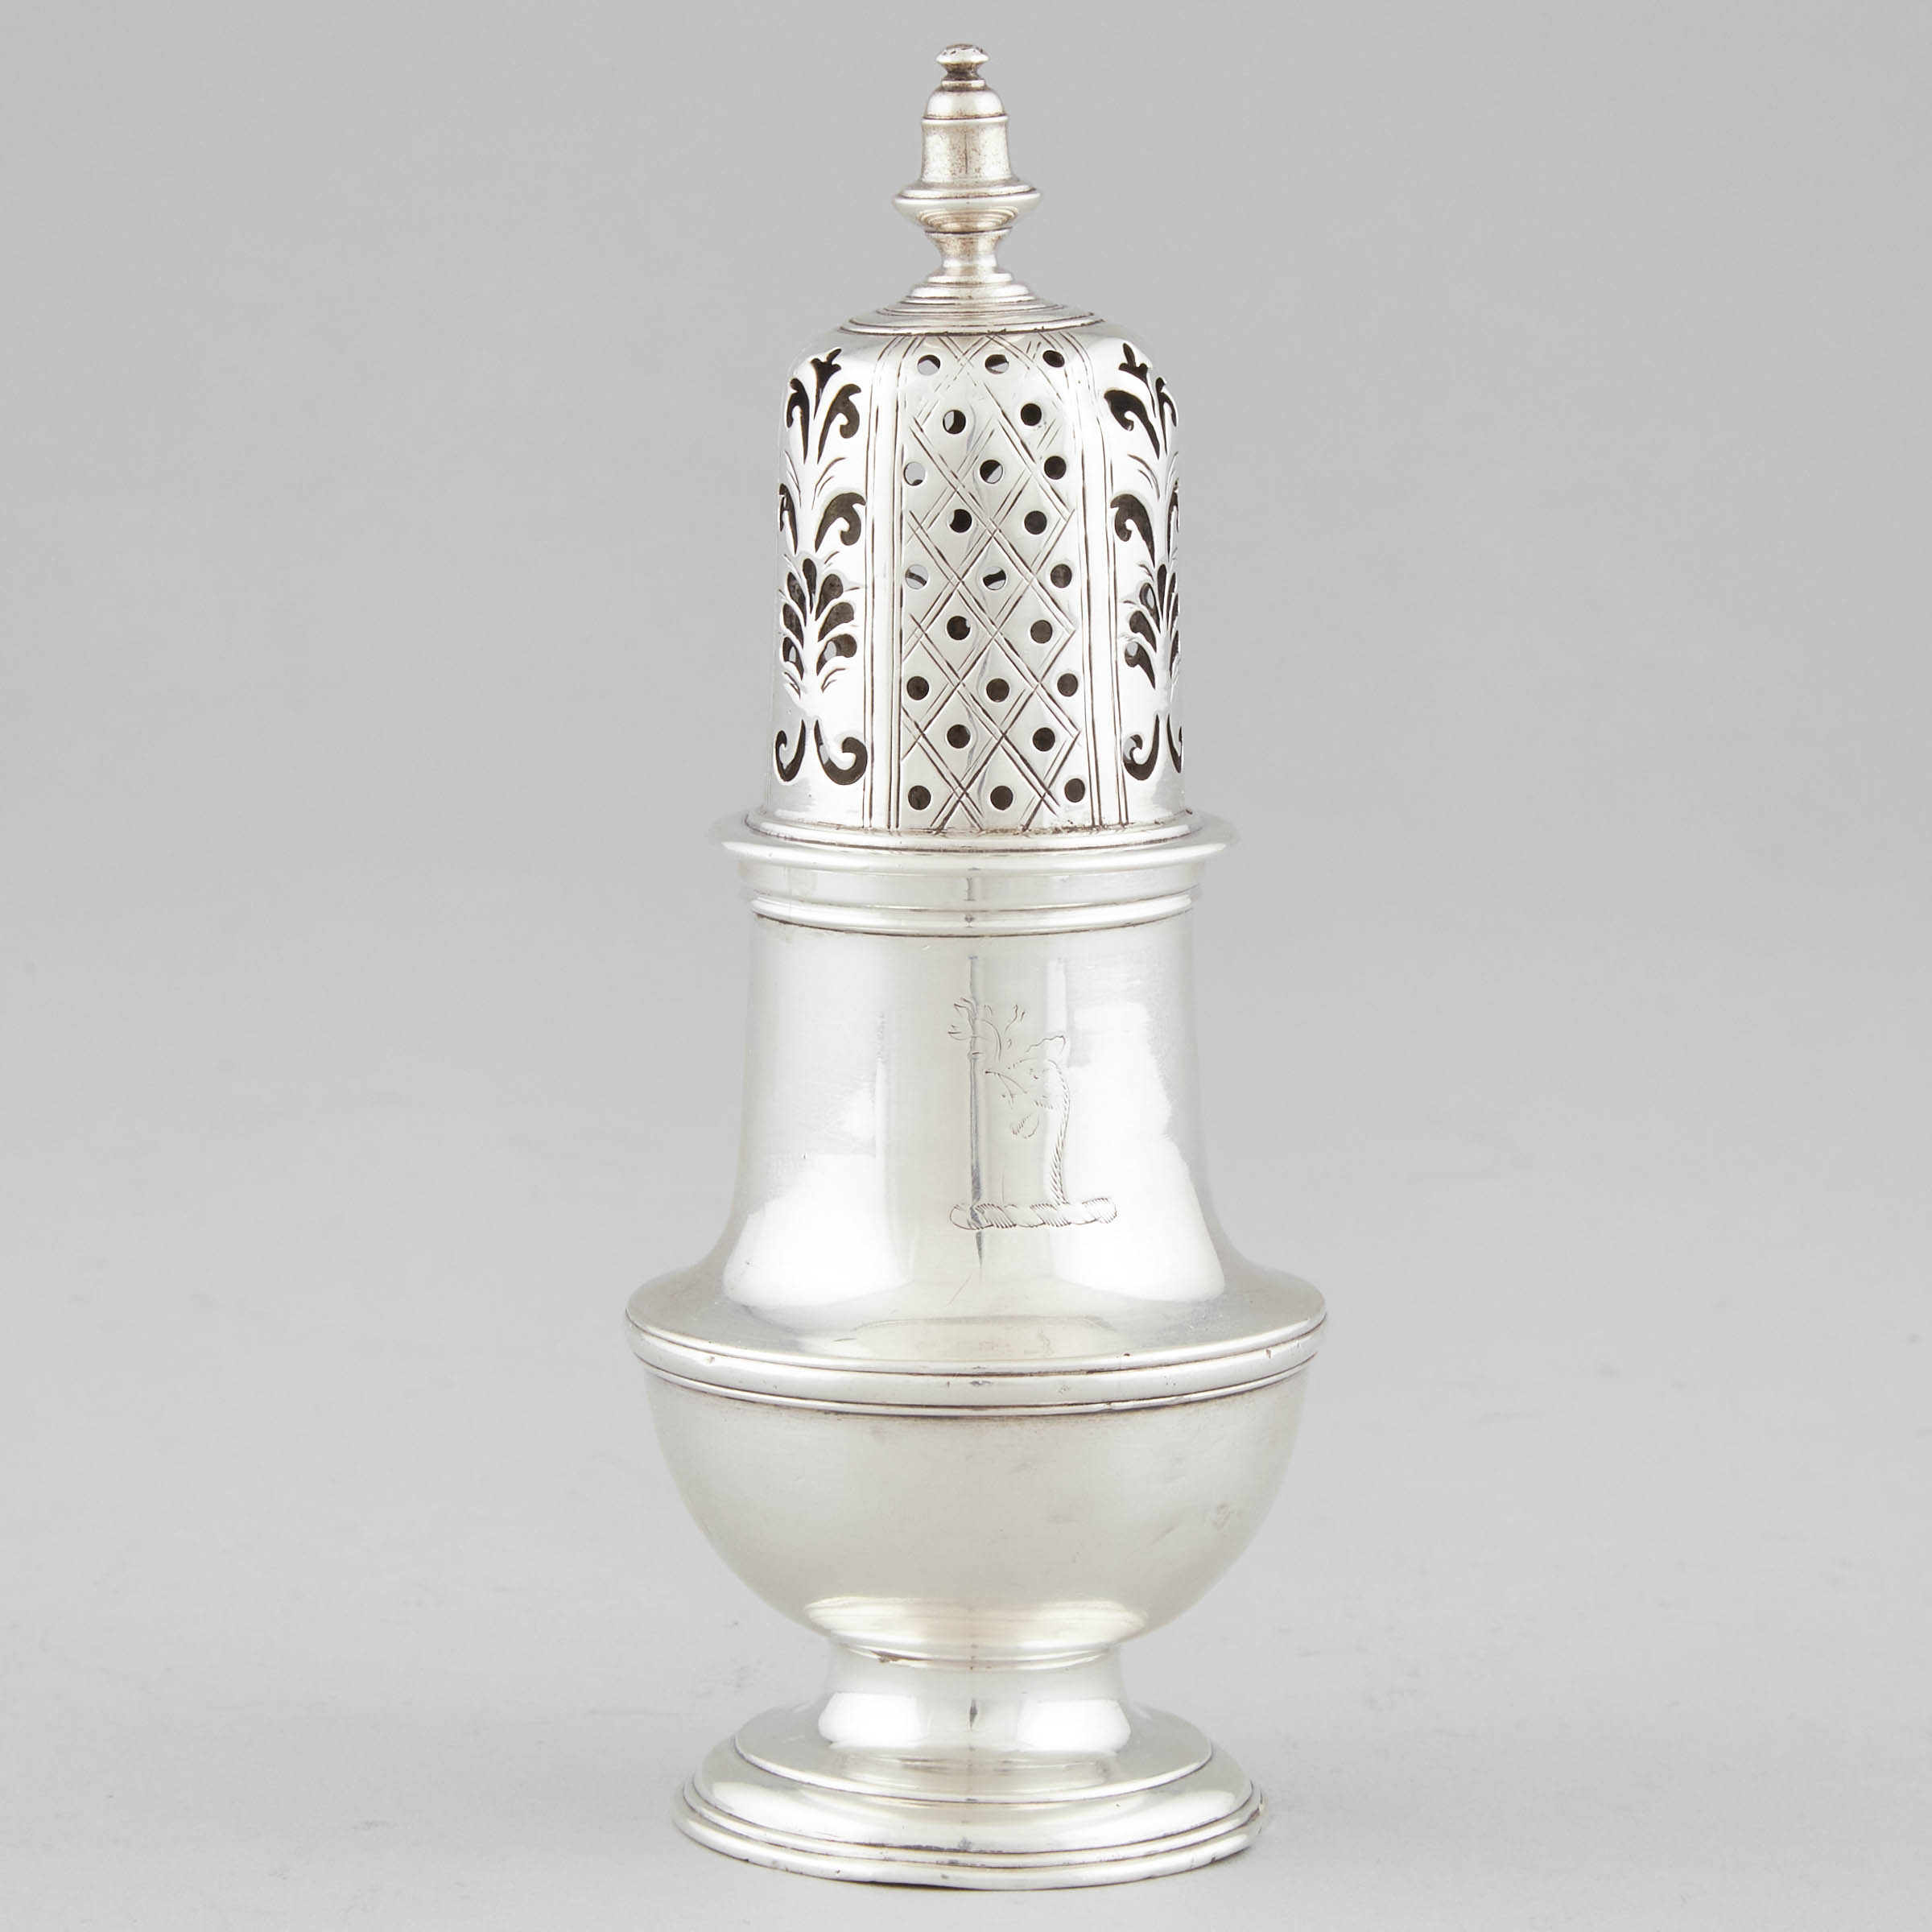 George II Silver Baluster Caster,